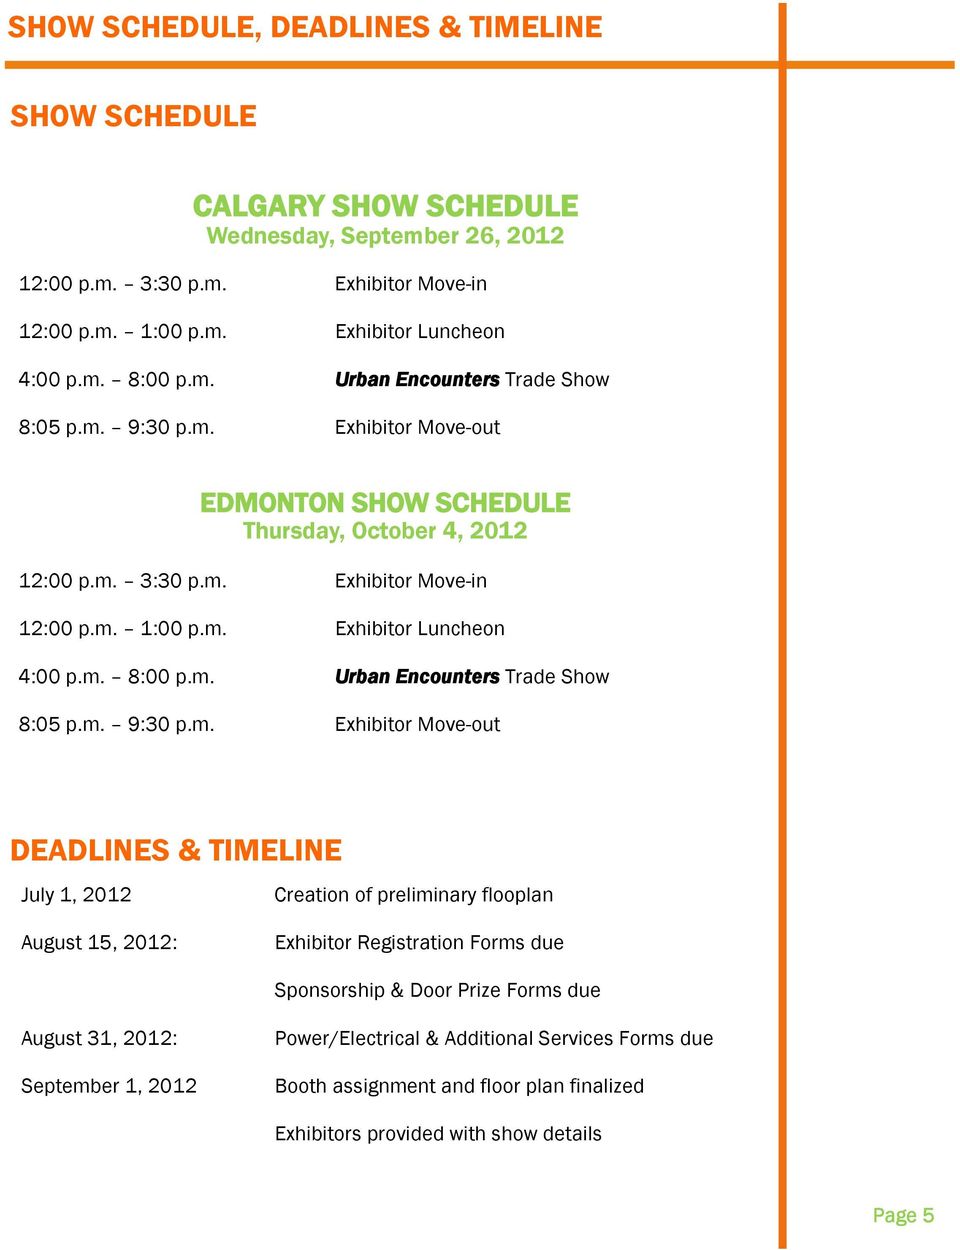 m. 9:30 p.m. Exhibitor Move-out DEADLINES & TIMELINE July 1, 2012 Creation of preliminary flooplan August 15, 2012: Exhibitor Registration Forms due Sponsorship & Door Prize Forms due August 31,